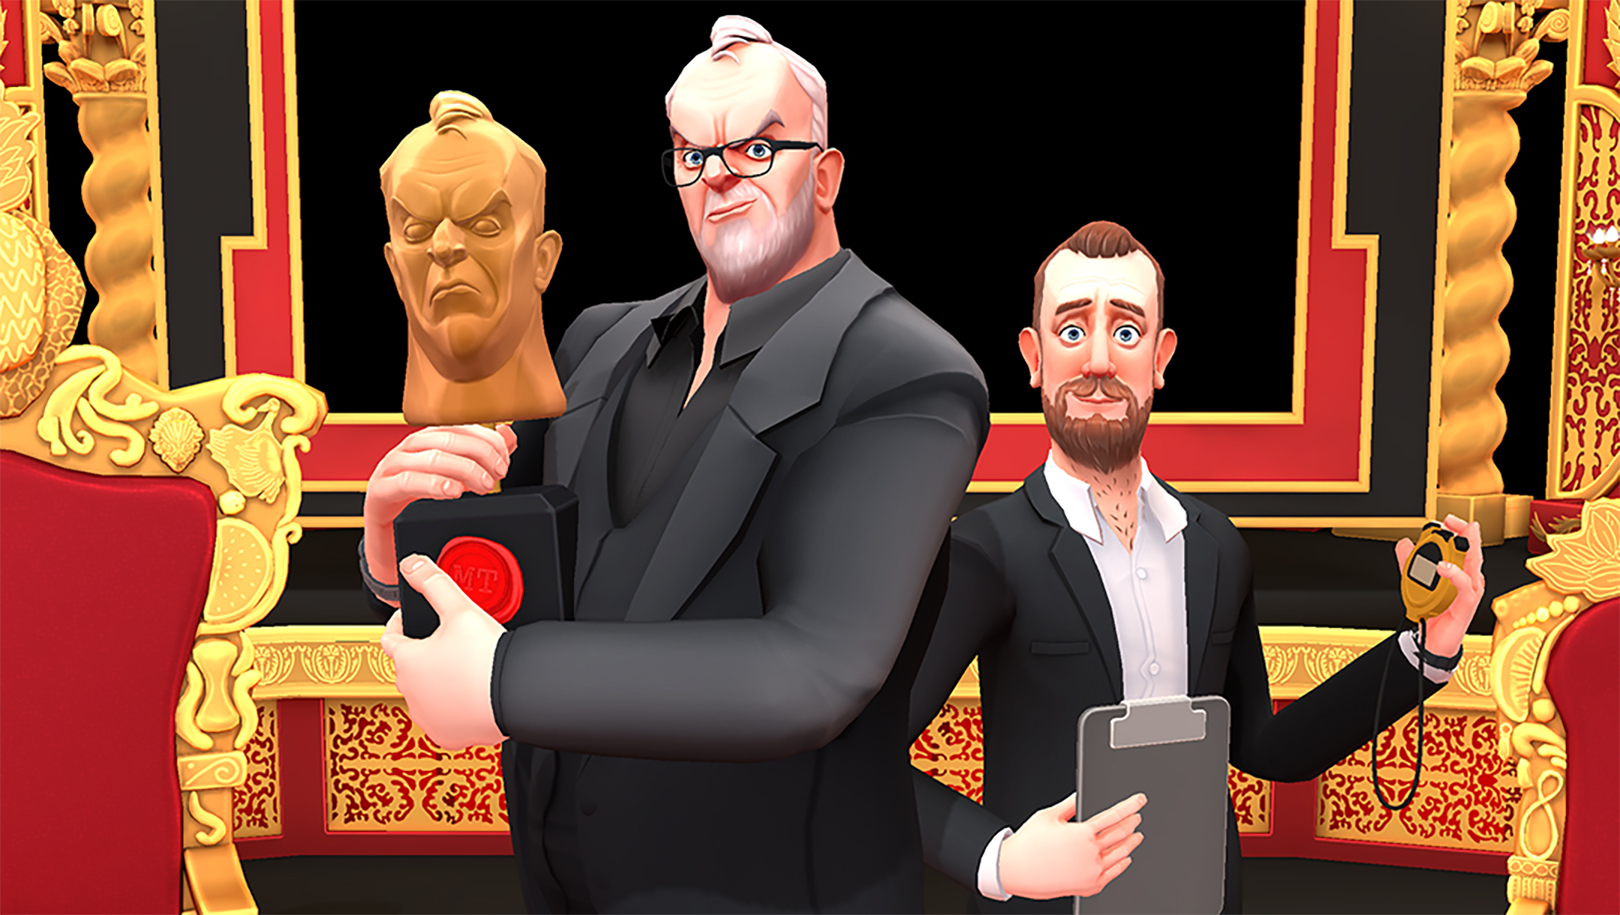  The Taskmaster VR game is out in a few weeks, and Little Alex Horne is resigned to what his avatar can expect from you sickos: 'They will definitely do things to me' 